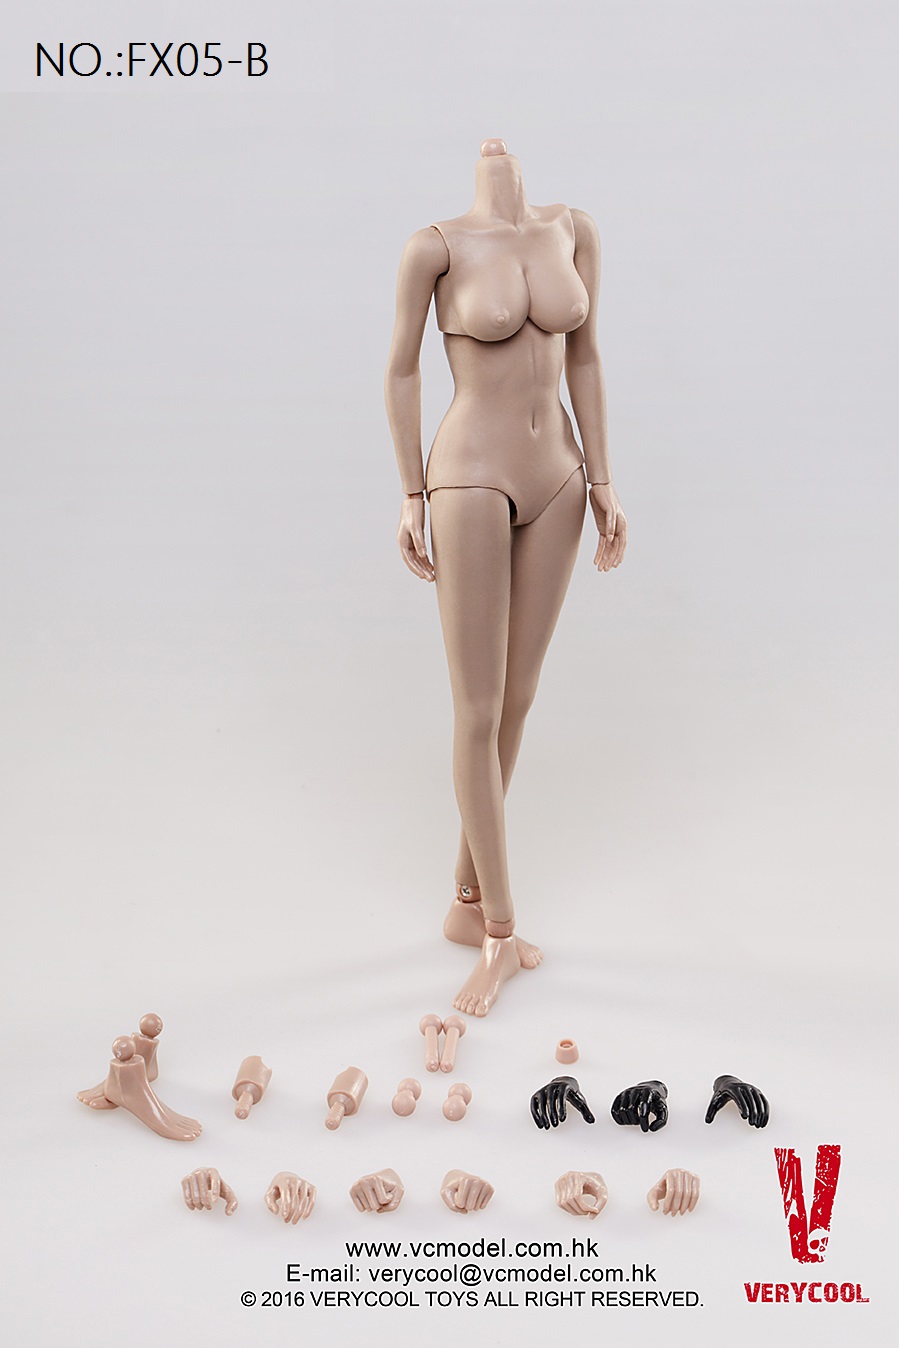 NEW PRODUCT: [head carving / body] VERYCOOL notice: 1/6 FX05 joint rubber female body COMING SOON 17190710